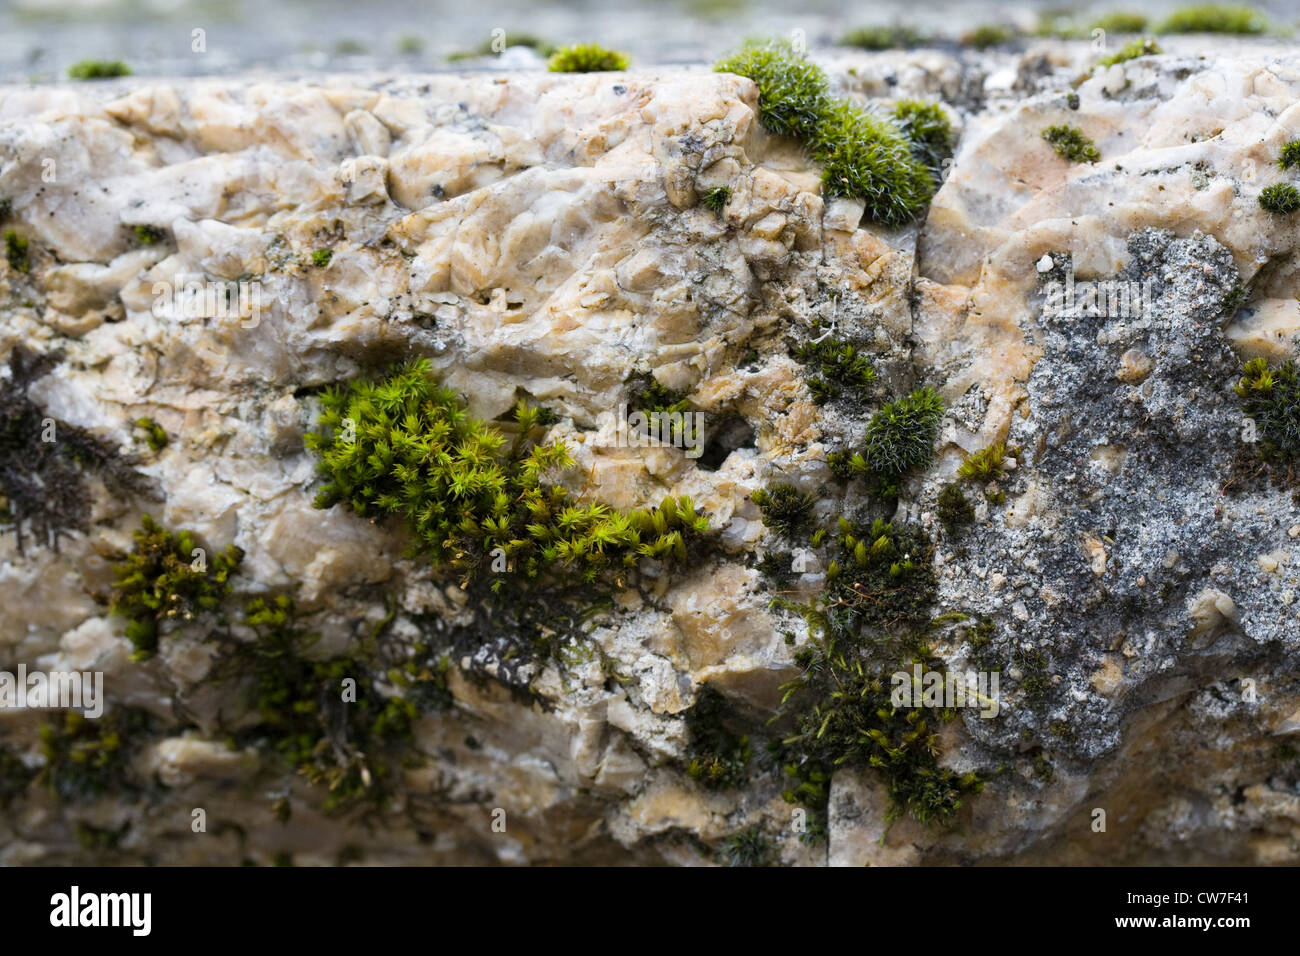 Moss growing on a stone table. Stock Photo